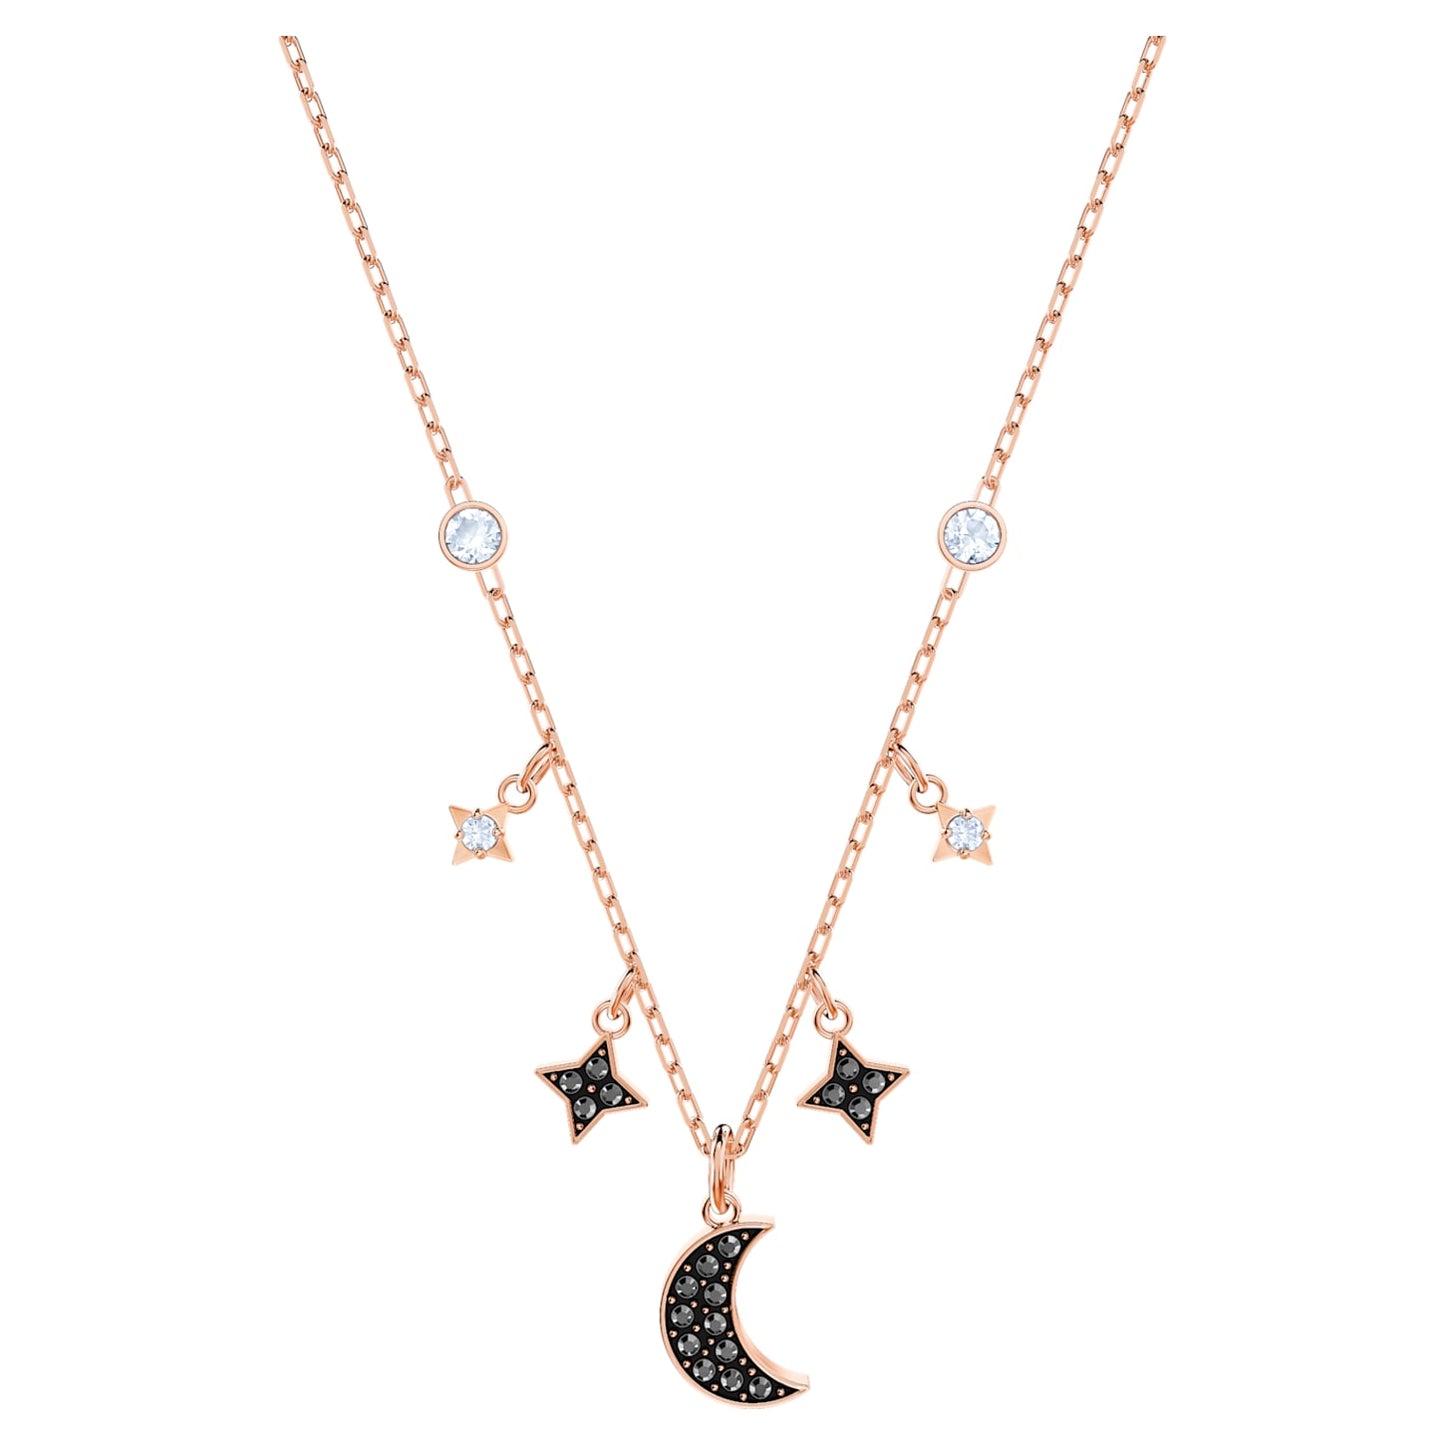 Swarovski Symbolic necklace Moon and star, Black, Rose gold-tone plated